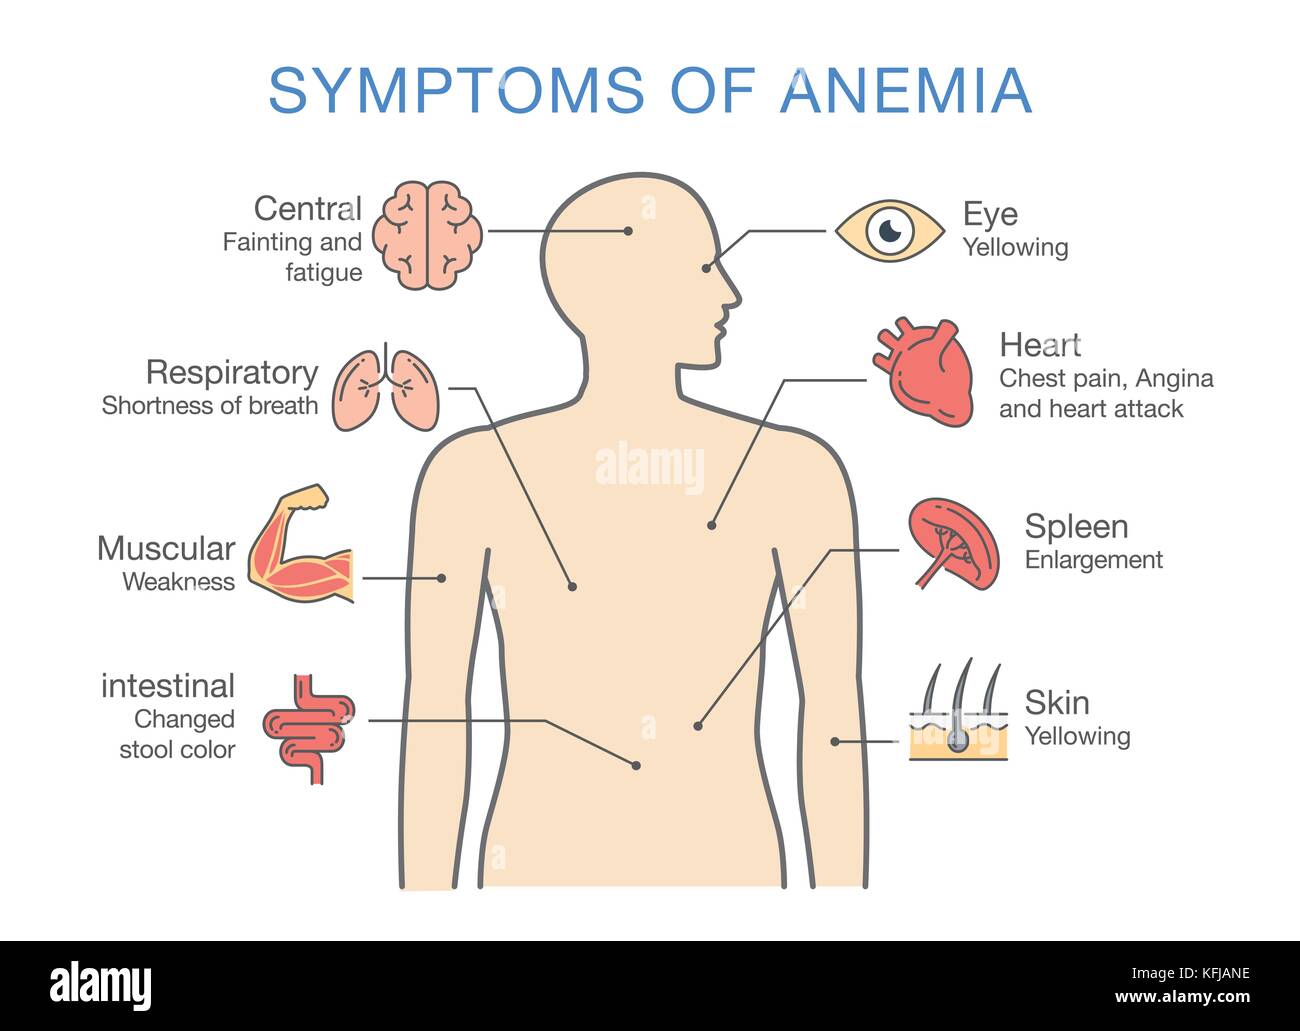 Symptoms common to many types of Anemia. Stock Vector